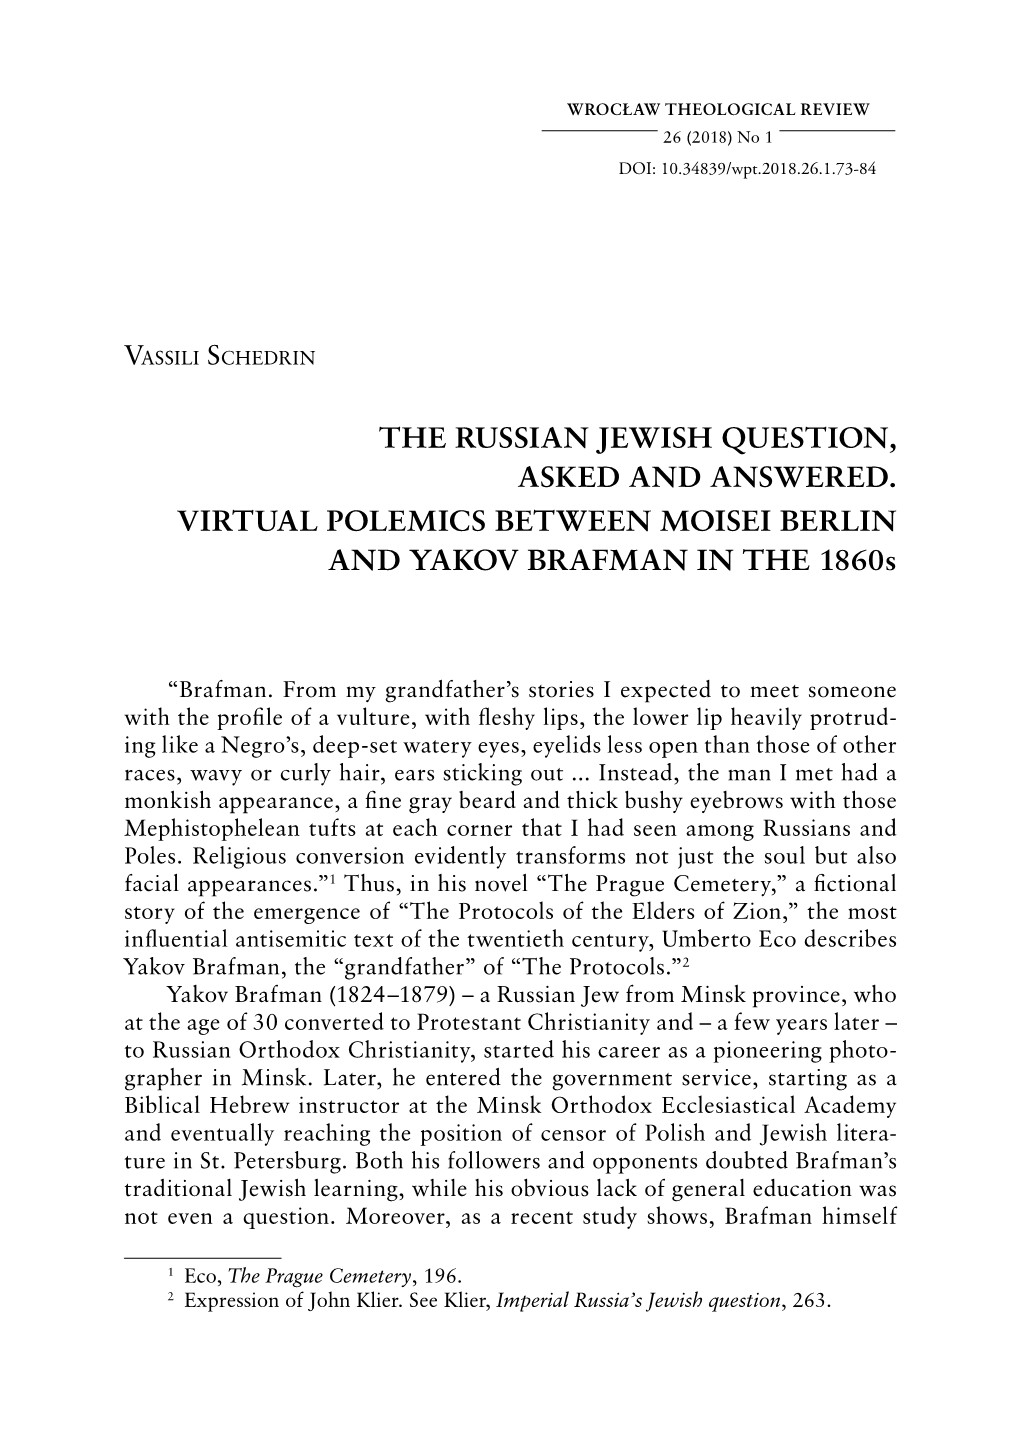 The Russian Jewish Question, Asked and Answered